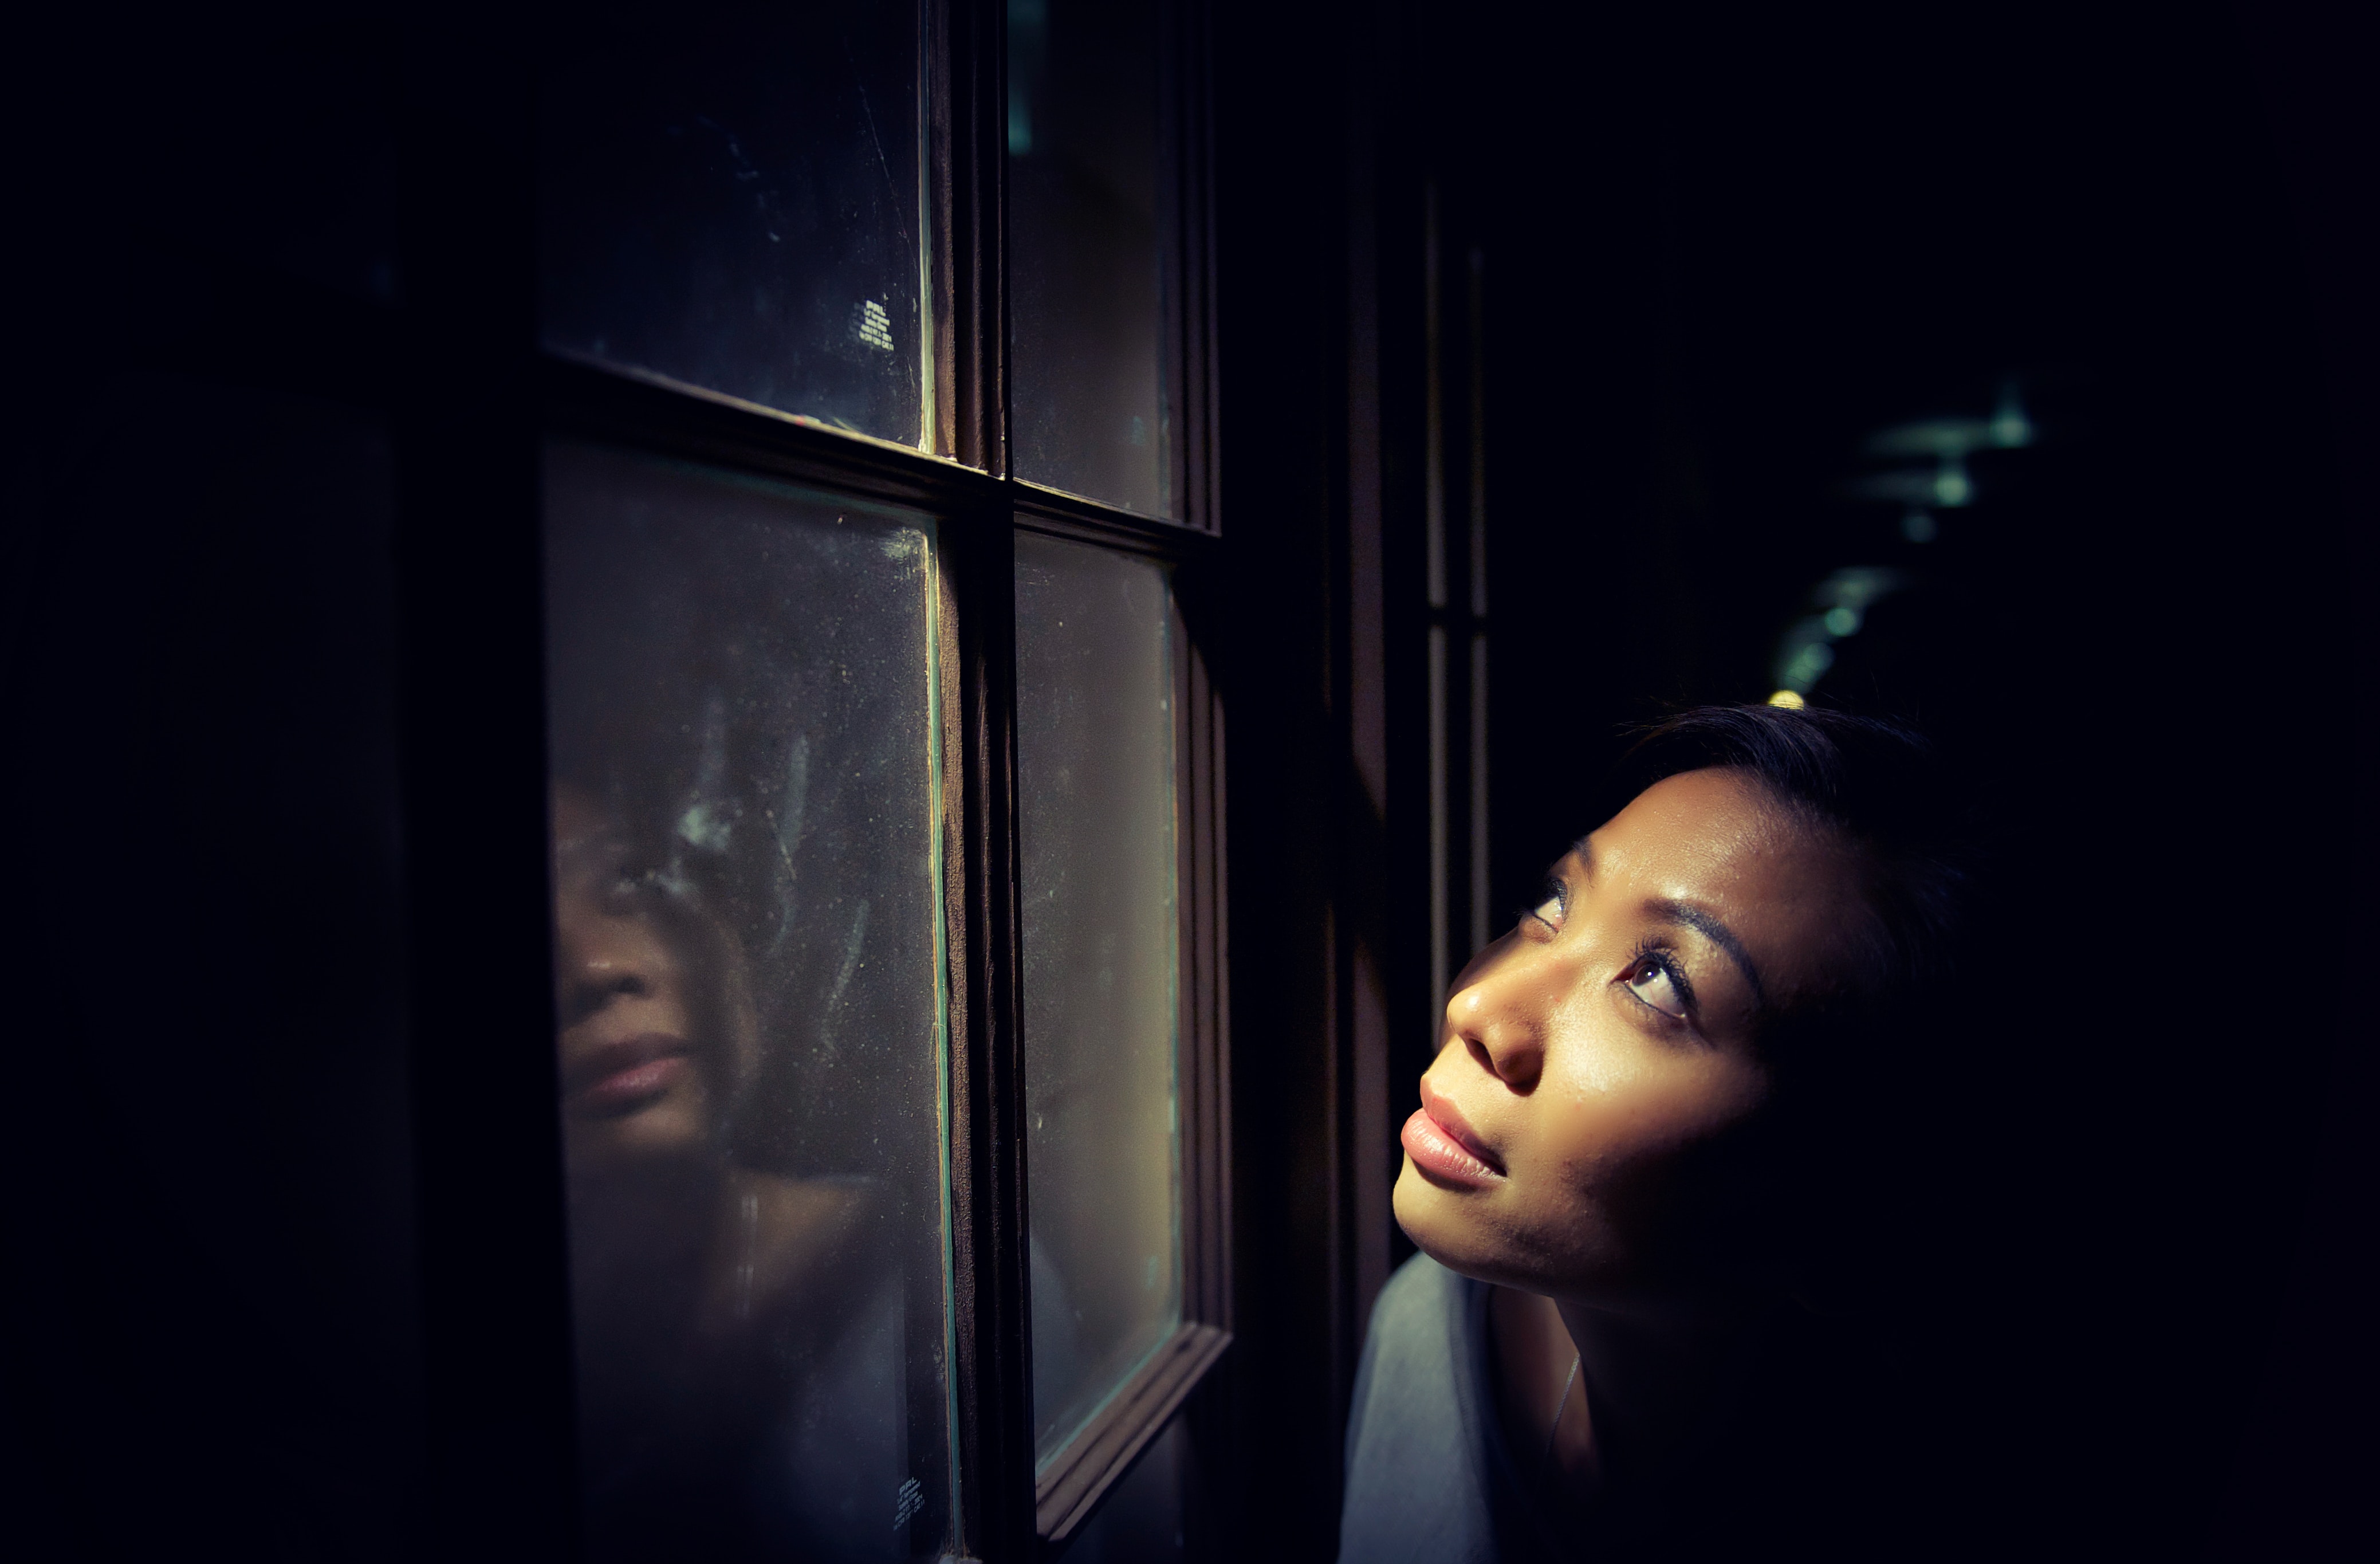 A woman looks towards the sky through a window. The light from the window illuminates her face and little else in a dim room. Her face looks hopeful. Can you really trust God? He leaves us signs all over the world that tell us you can trust Him!